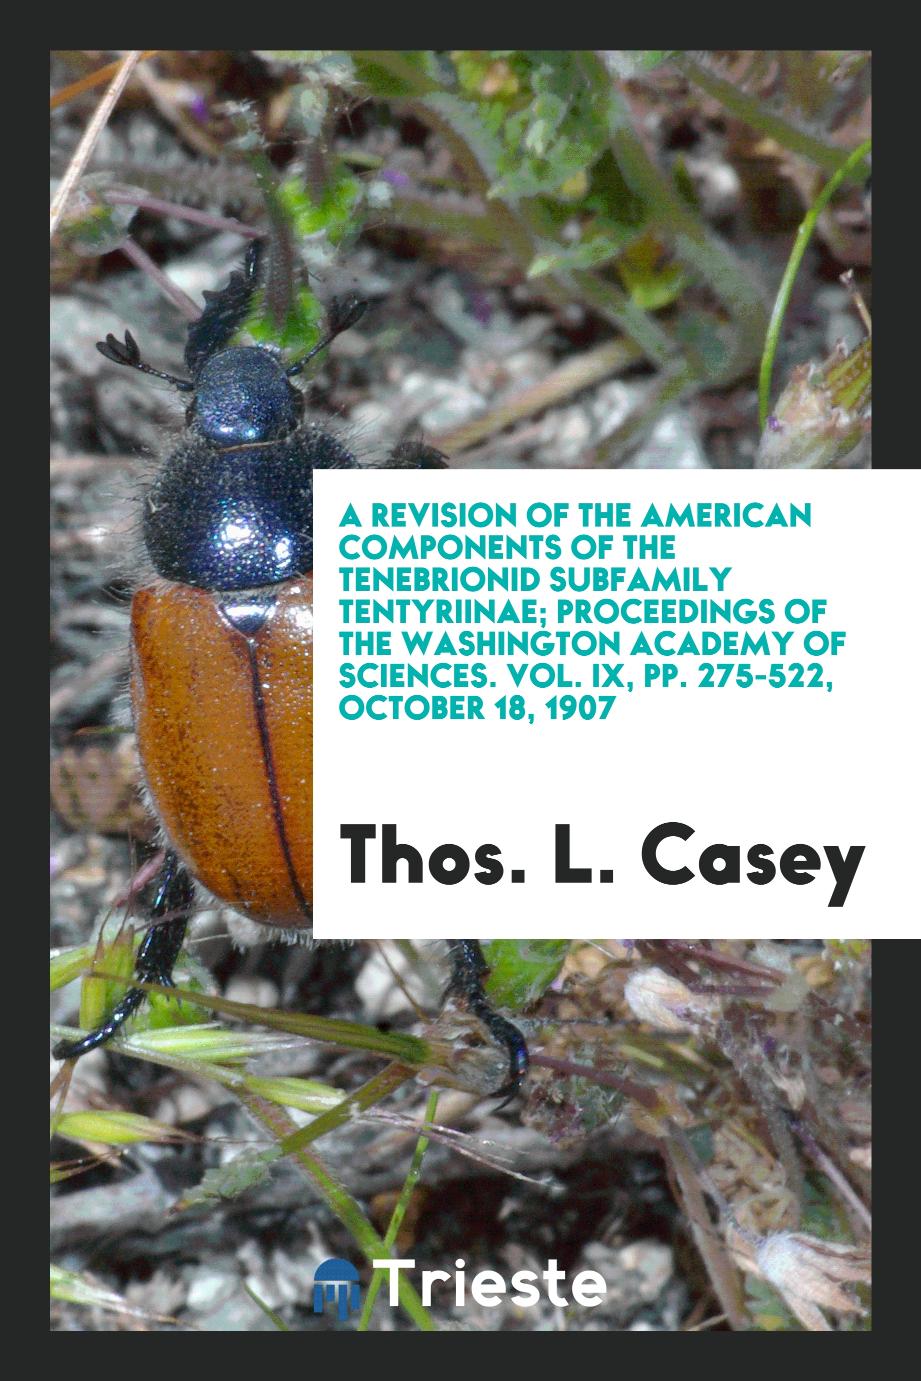 A revision of the American components of the tenebrionid subfamily Tentyriinae; Proceedings of the Washington academy of sciences. Vol. IX, pp. 275-522, October 18, 1907